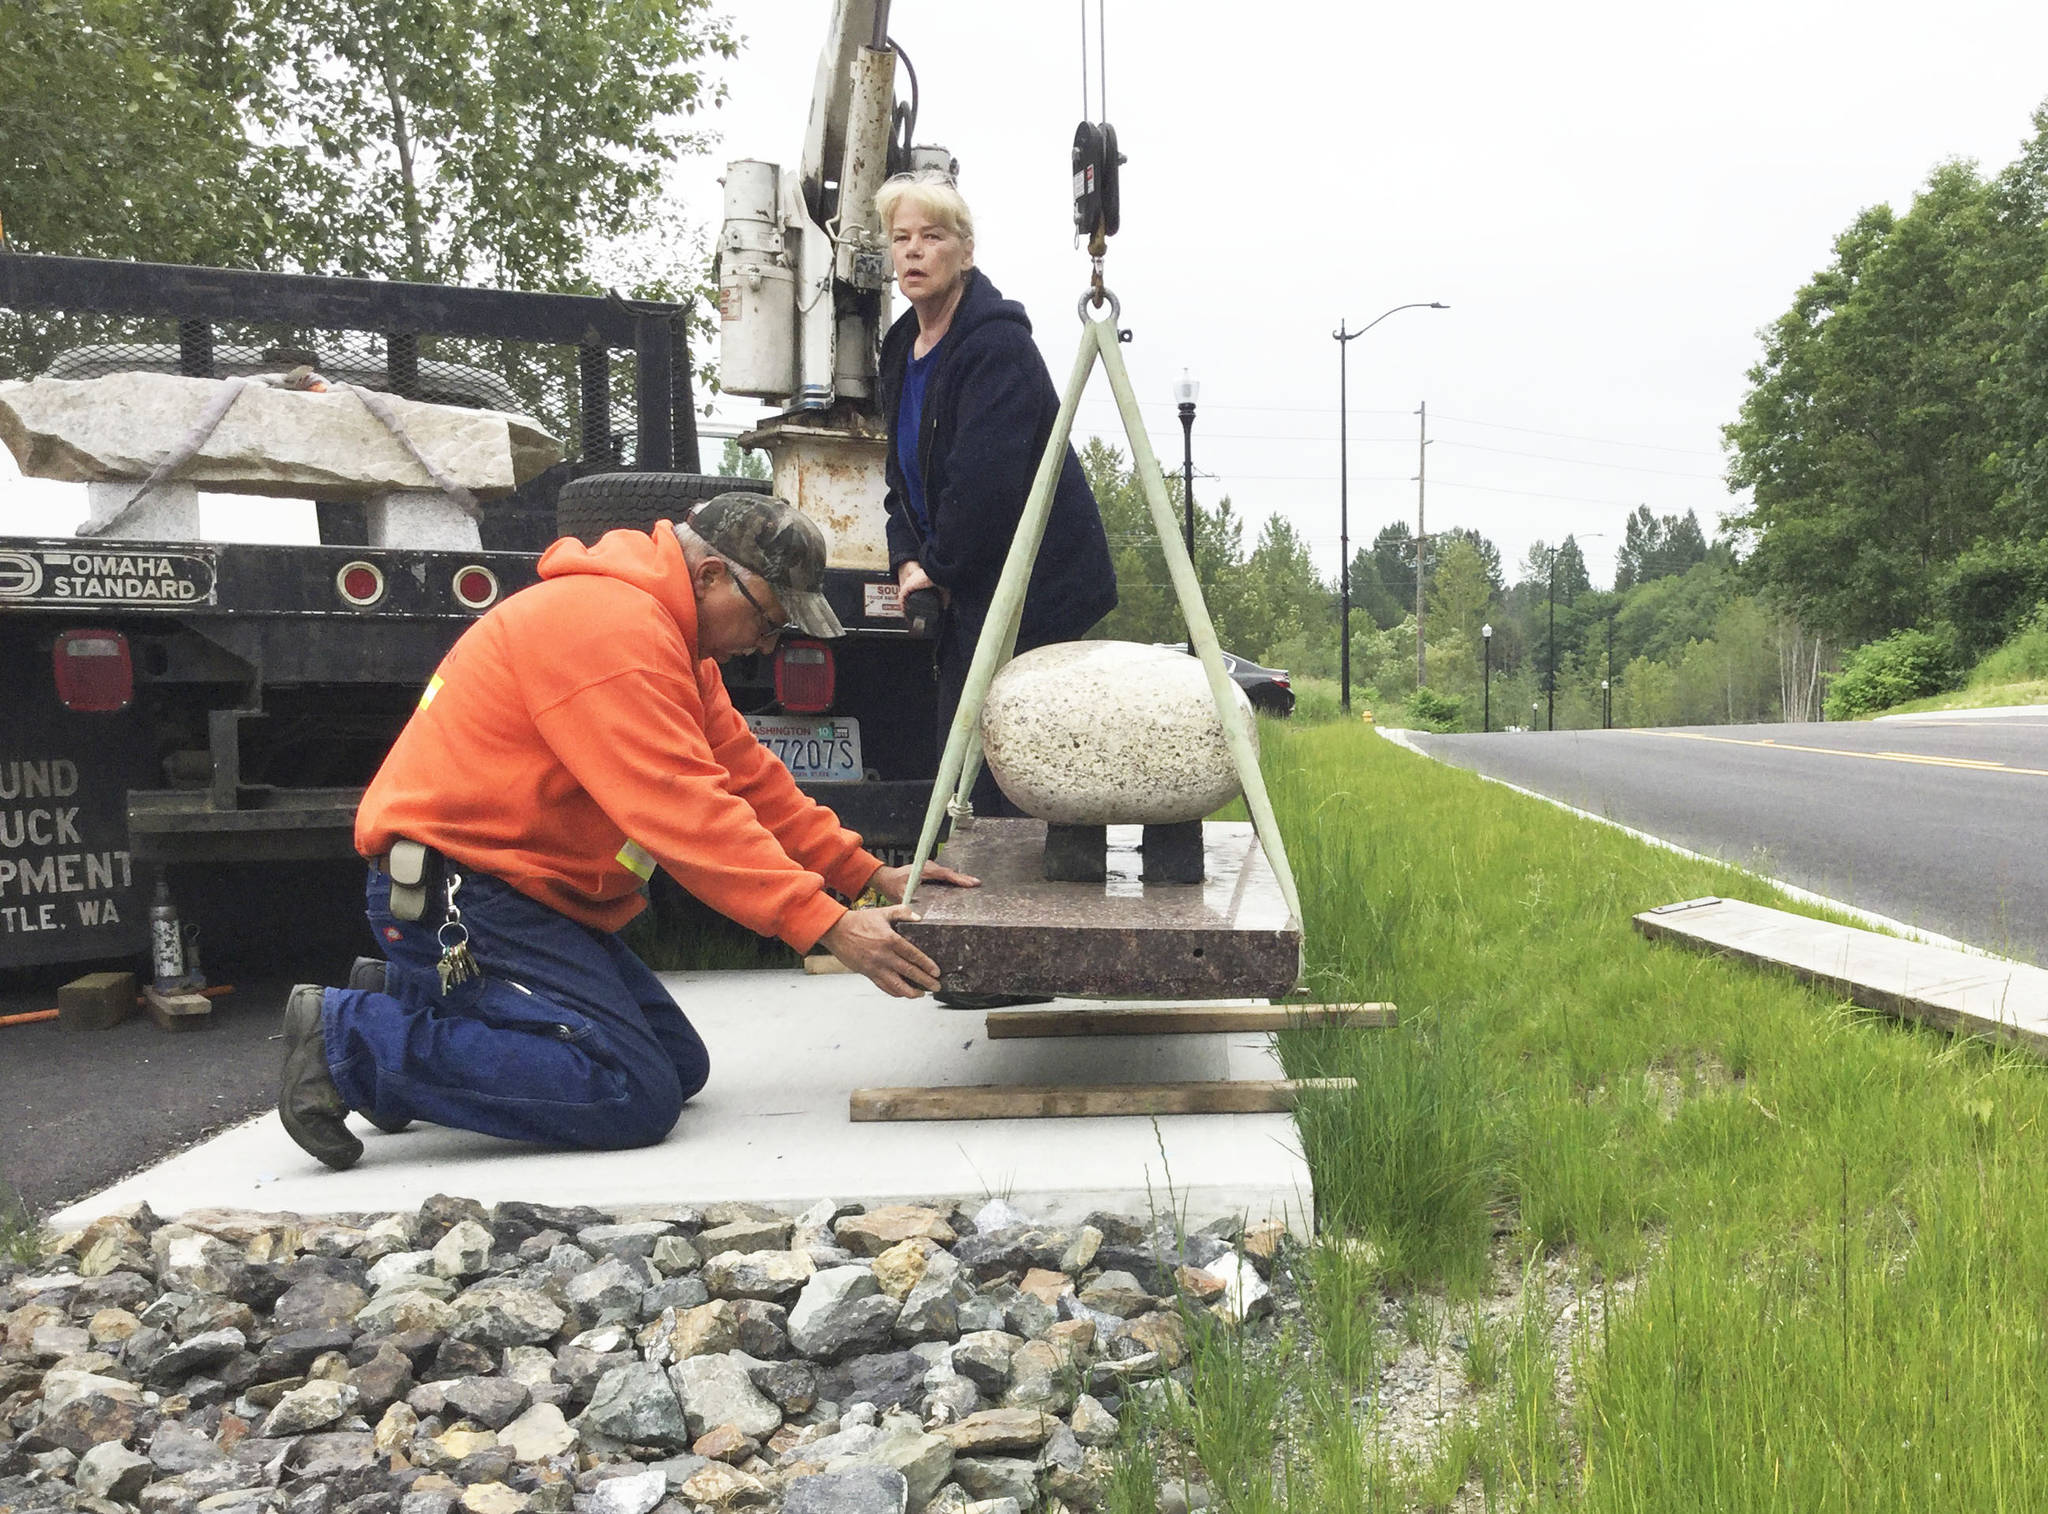 Stone artist Verena Schiffert controls the winch as Public Works employee Brock Talbot sets in place one of two sculpted benches being installed along Arlington Valley Road.